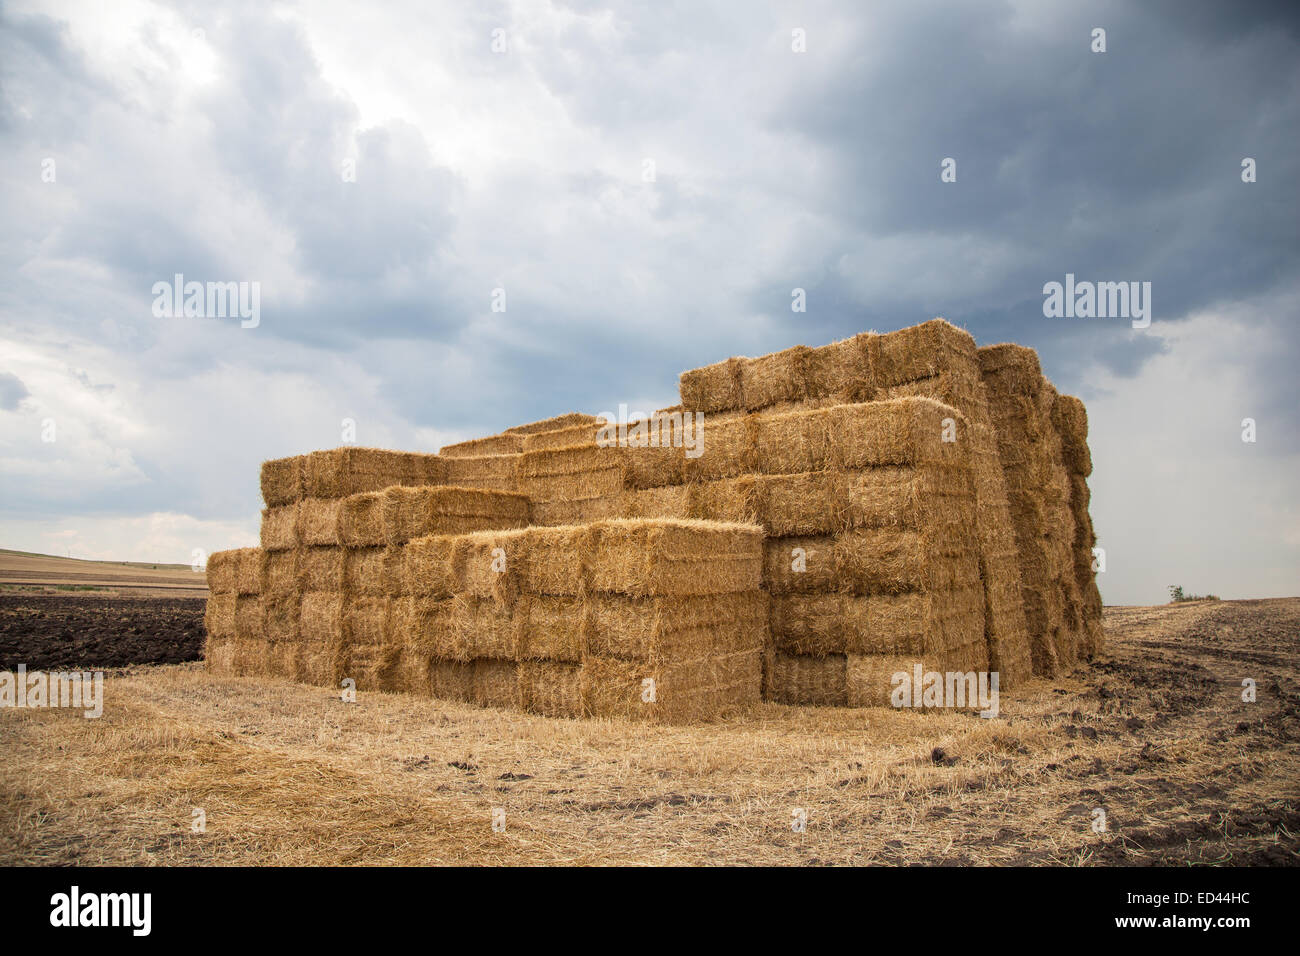 Pile of straw bales in a cloudy day. Stock Photo